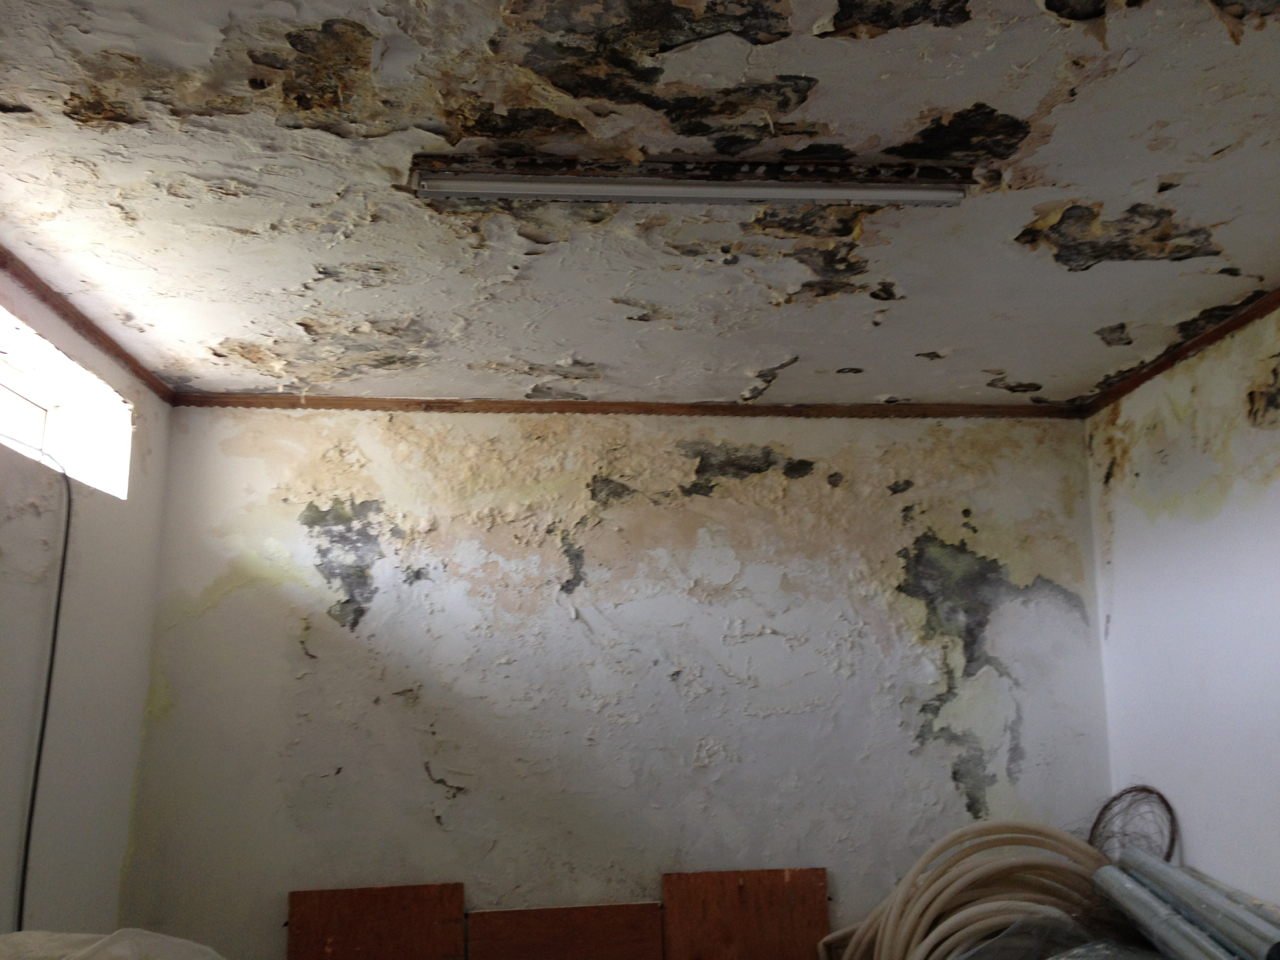 The clinic roof leaking has gotten progressively worse and now several rooms are completely unusable. Repairing the roof will cost $15,000, and is our highest priority this year.